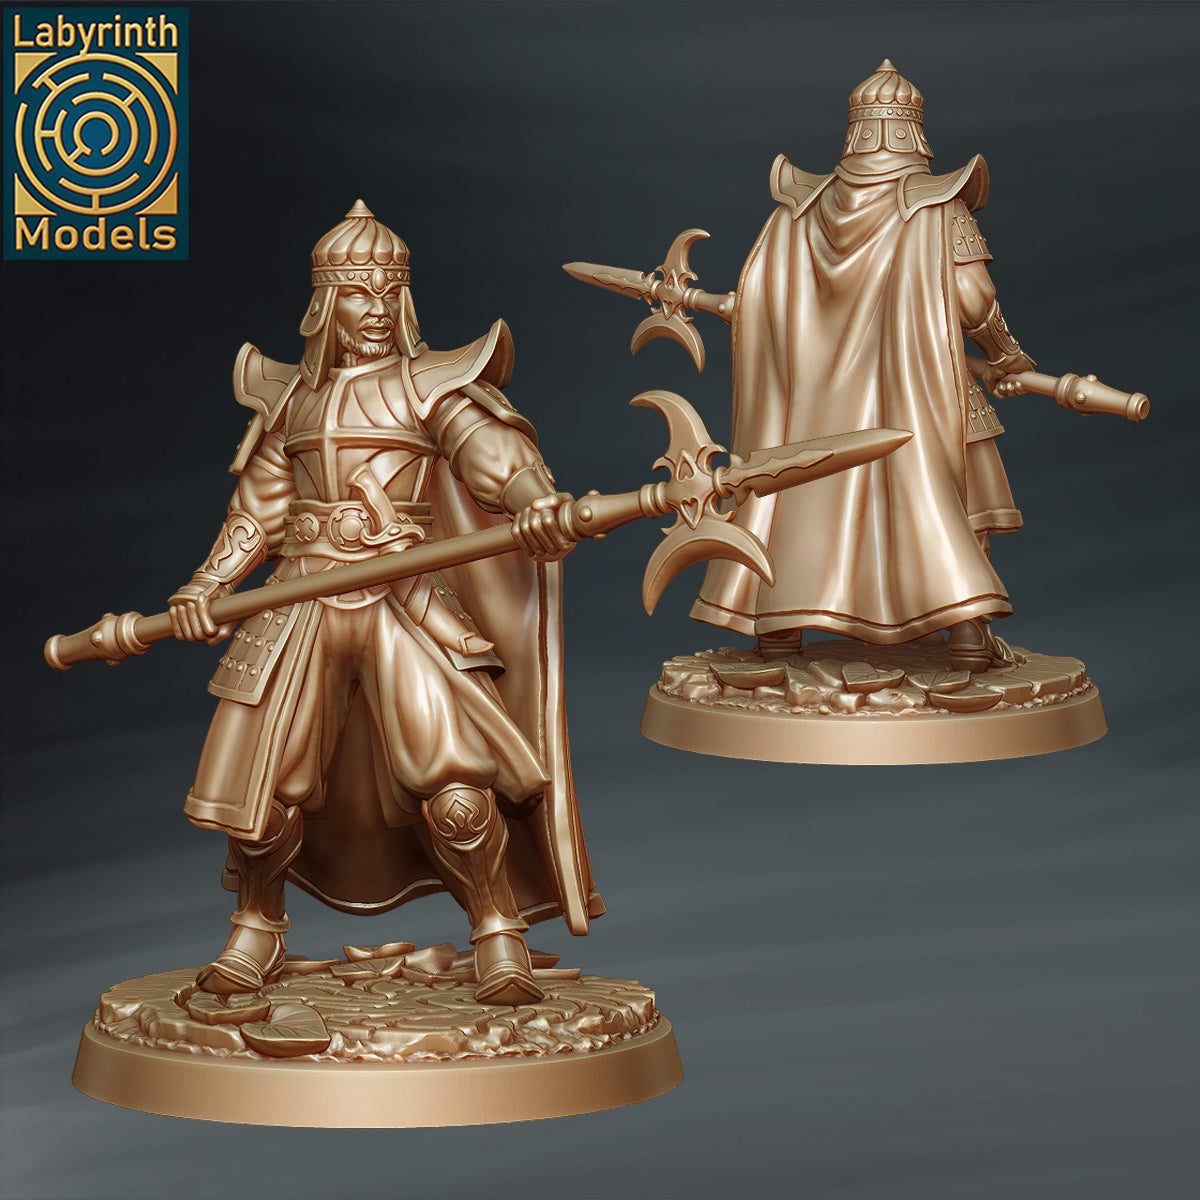 Sultan Guards by Labyrinth Models